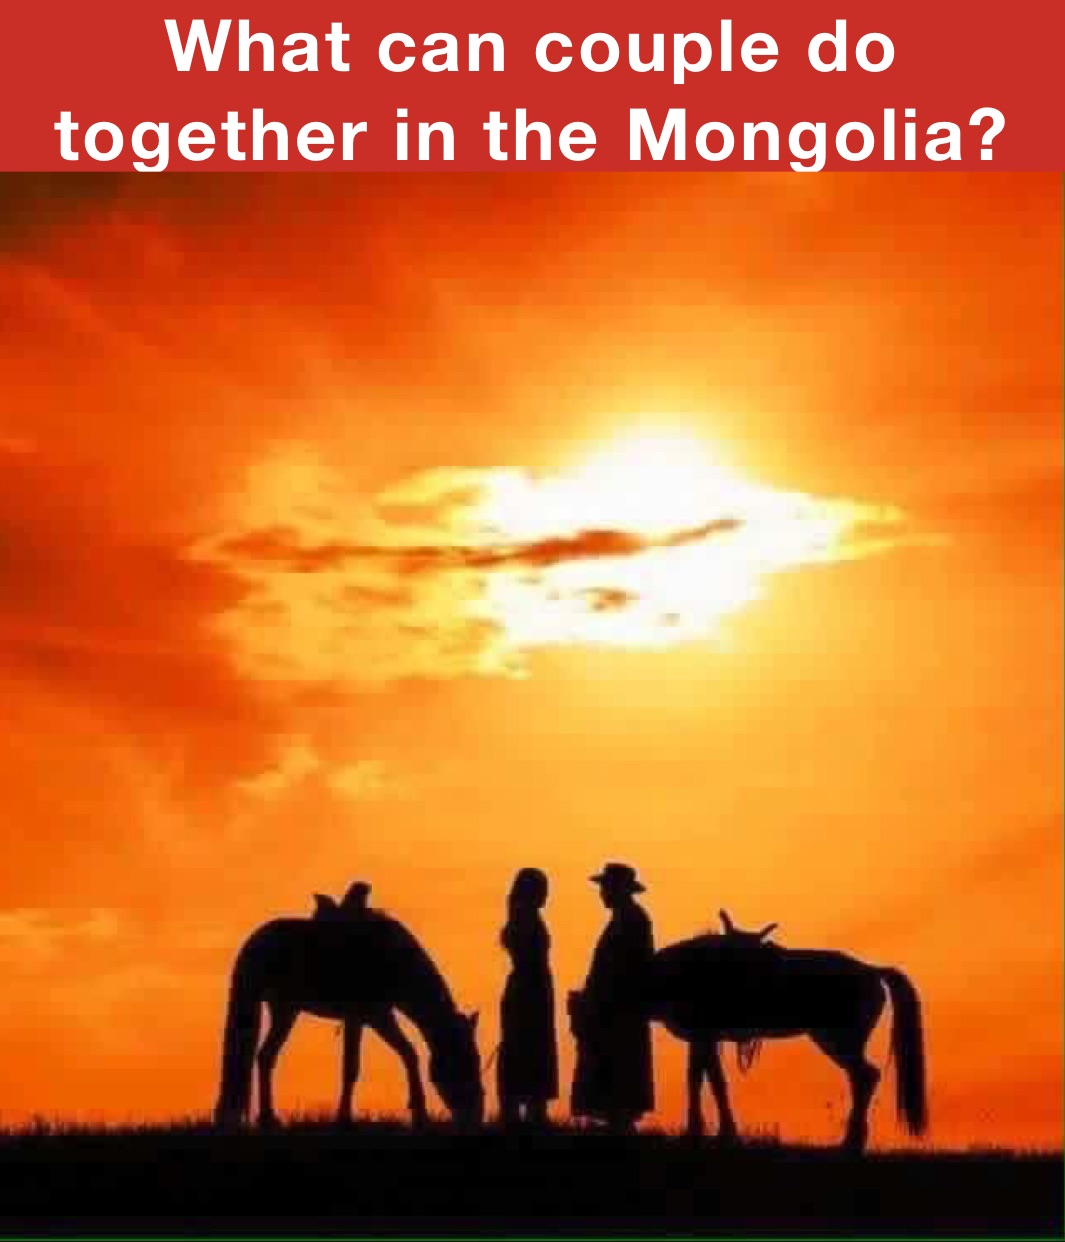 What can couple do together in the Mongolia?